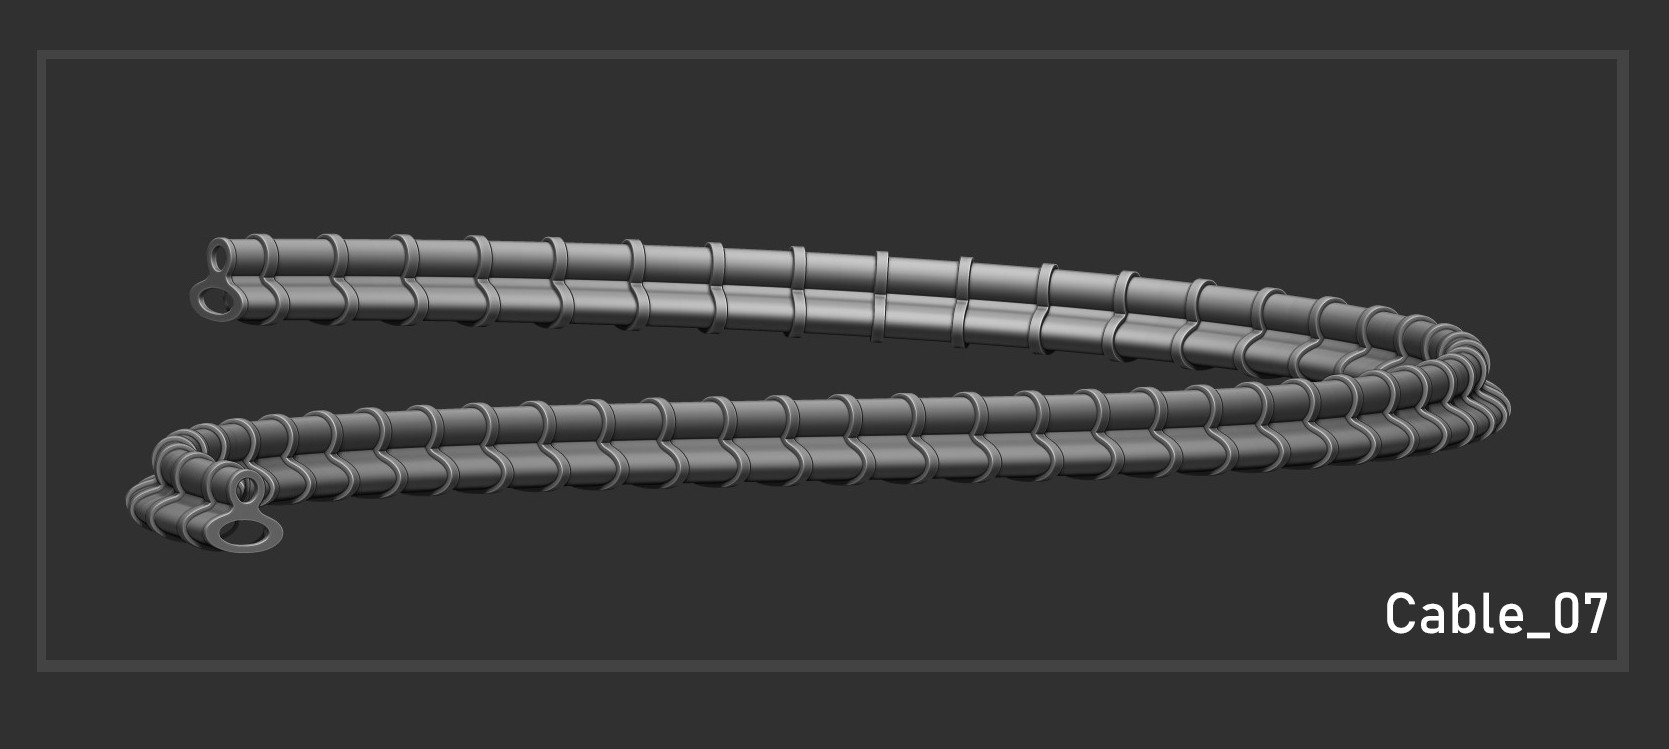 cables cords imm zbrush